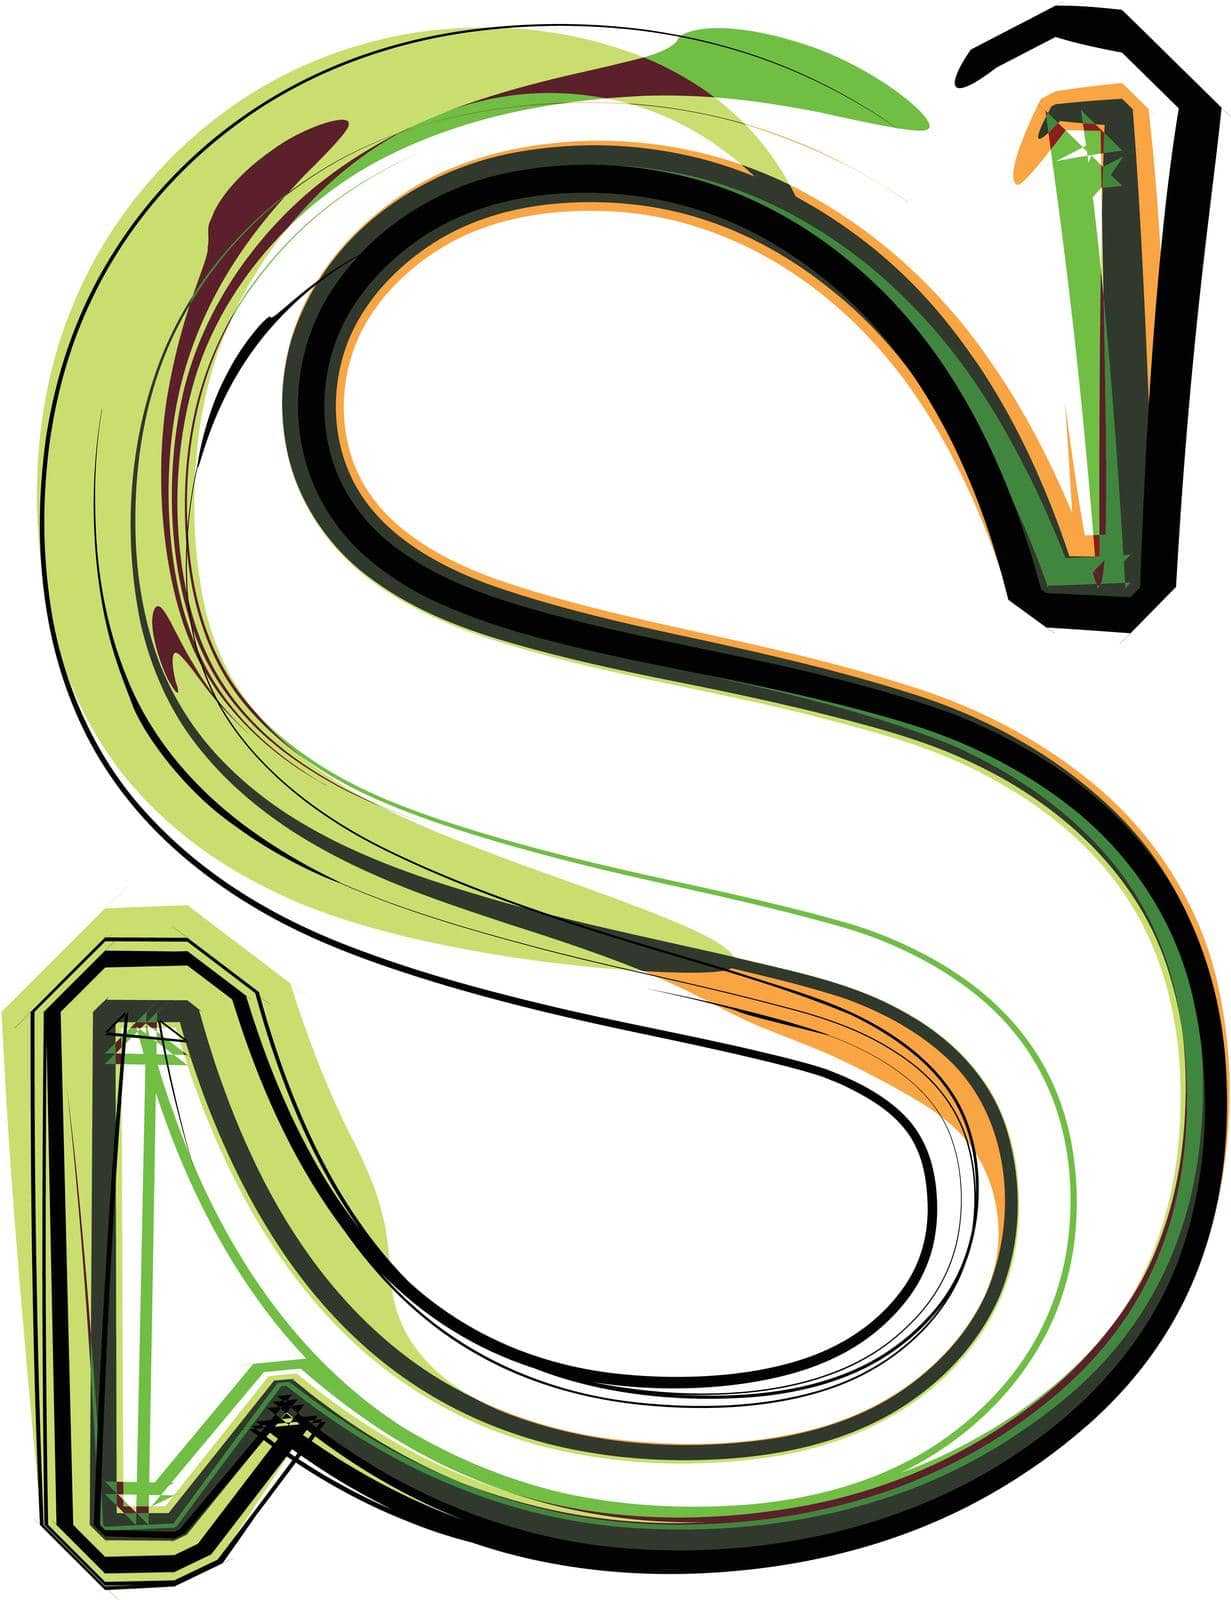 Organic type. Letter S by aroas